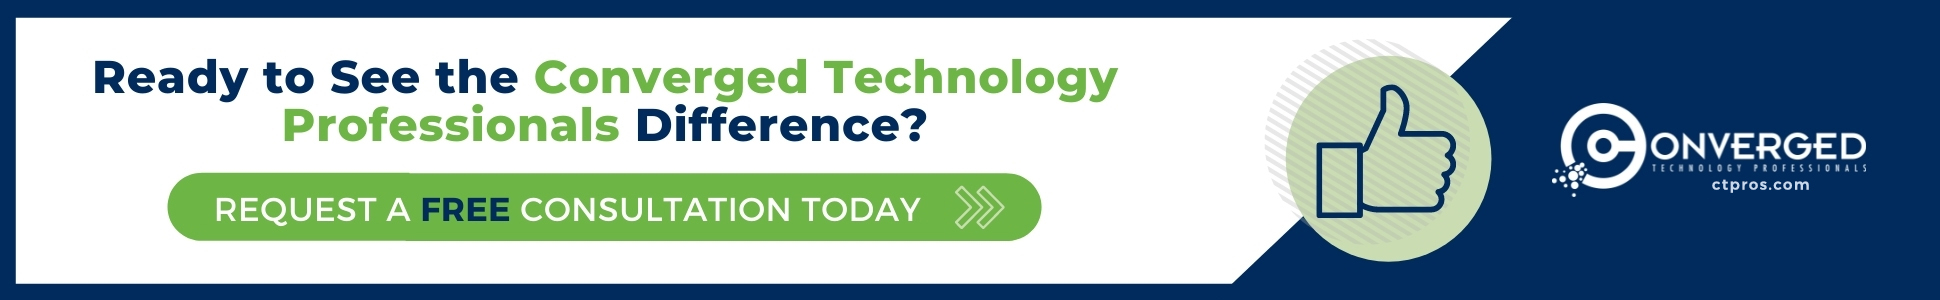 The Converged Technology Professionals Difference